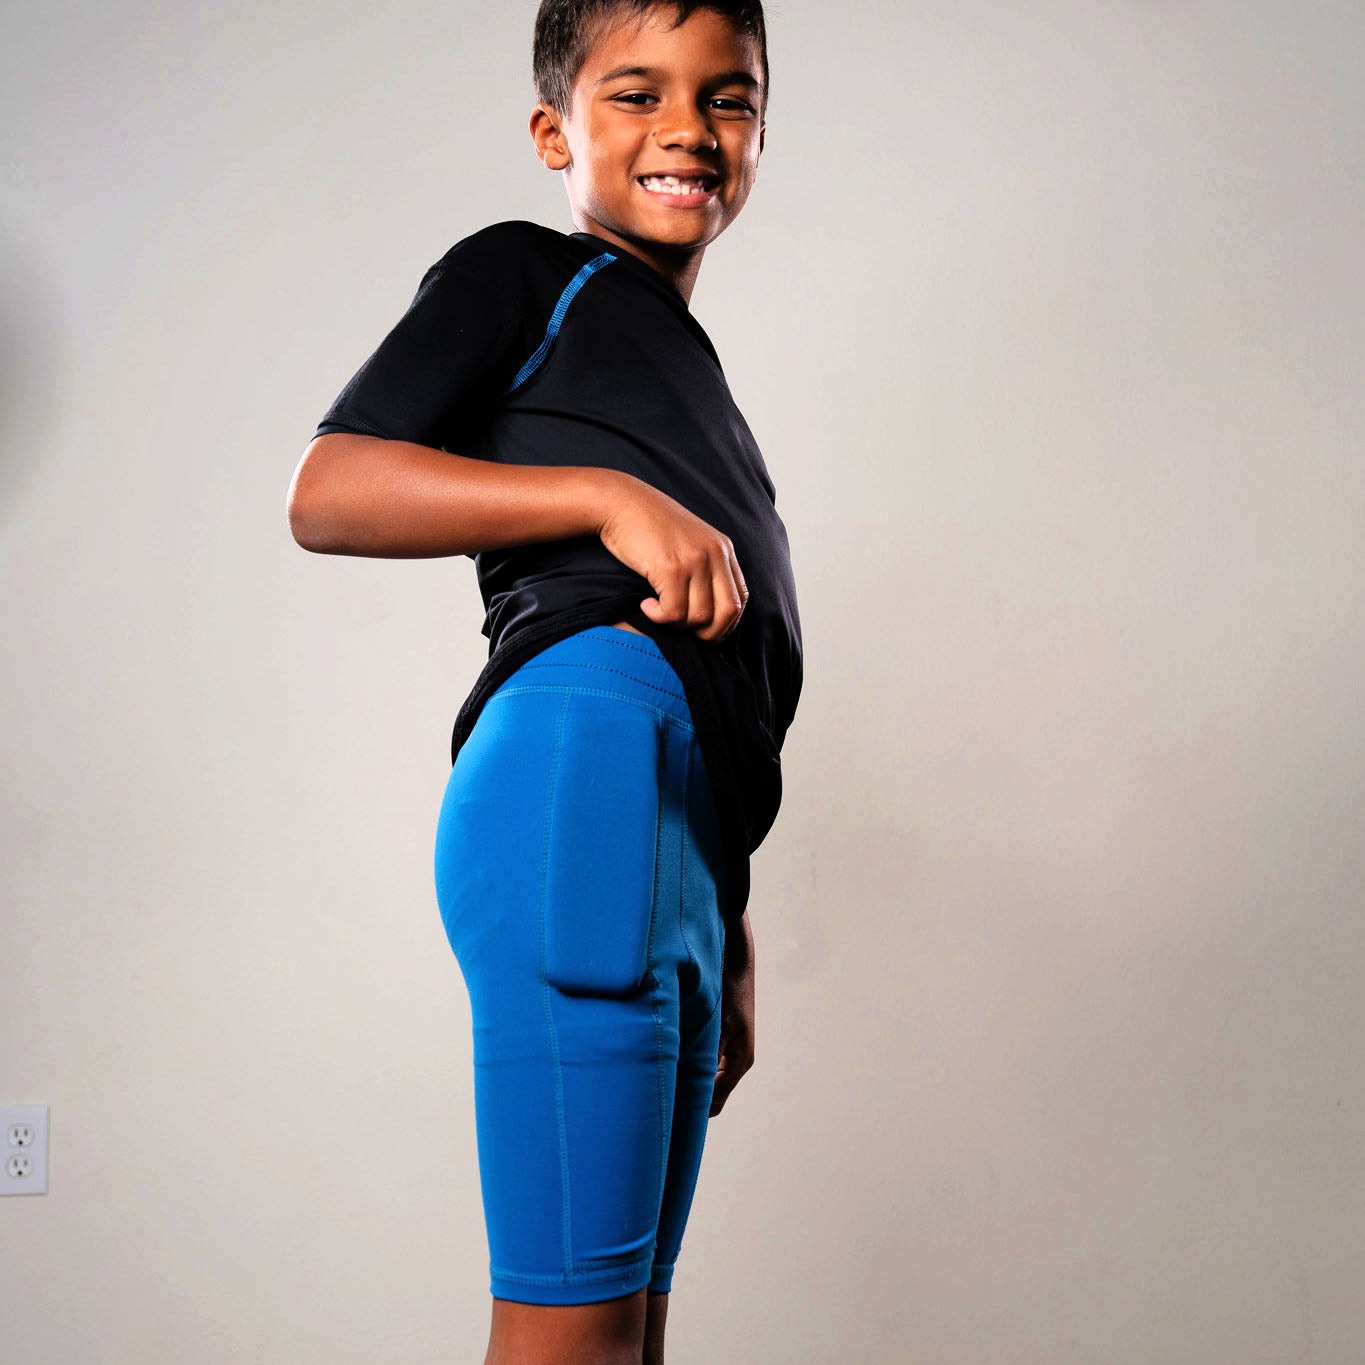 Boy's blue weighted training short for sports and strength training.